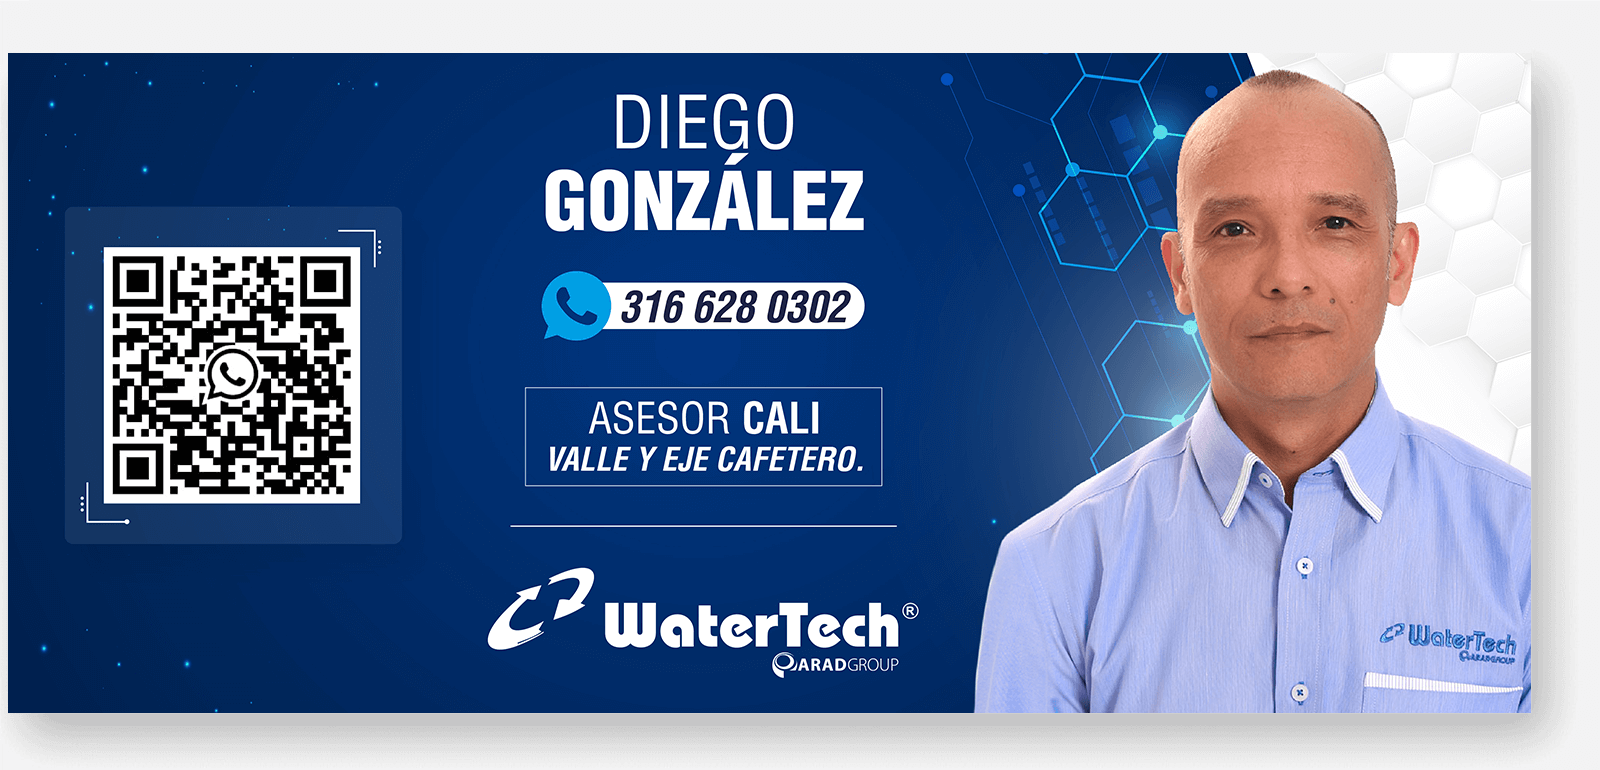 Banners Asesores   WATERTECH Diego